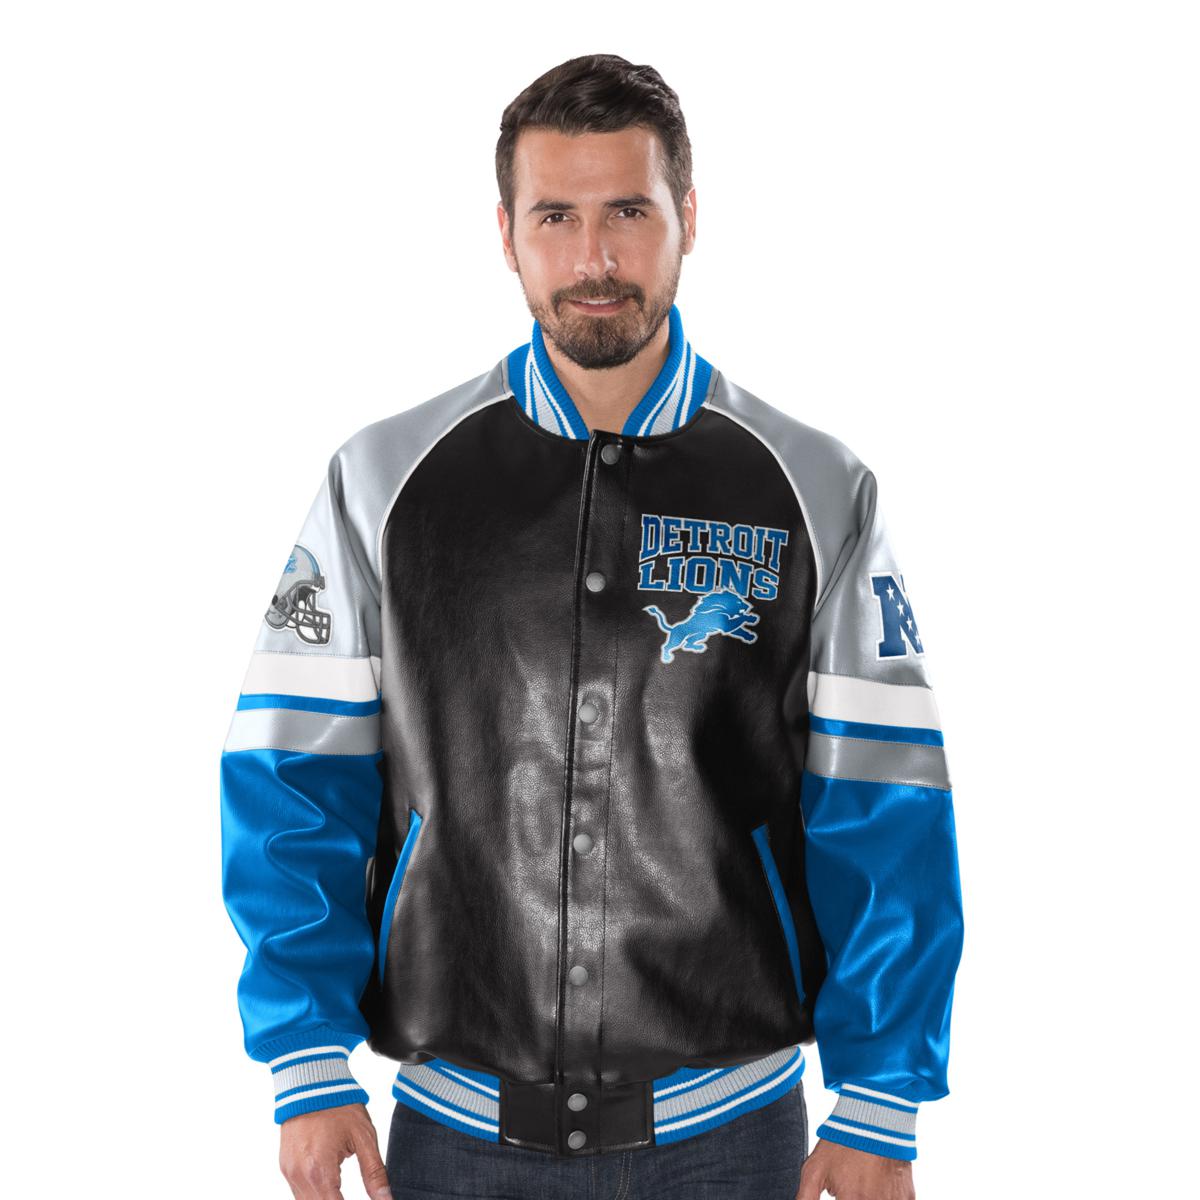 AS IS' Officially Licensed NFL Men's Faux Leather Varsity Jacket